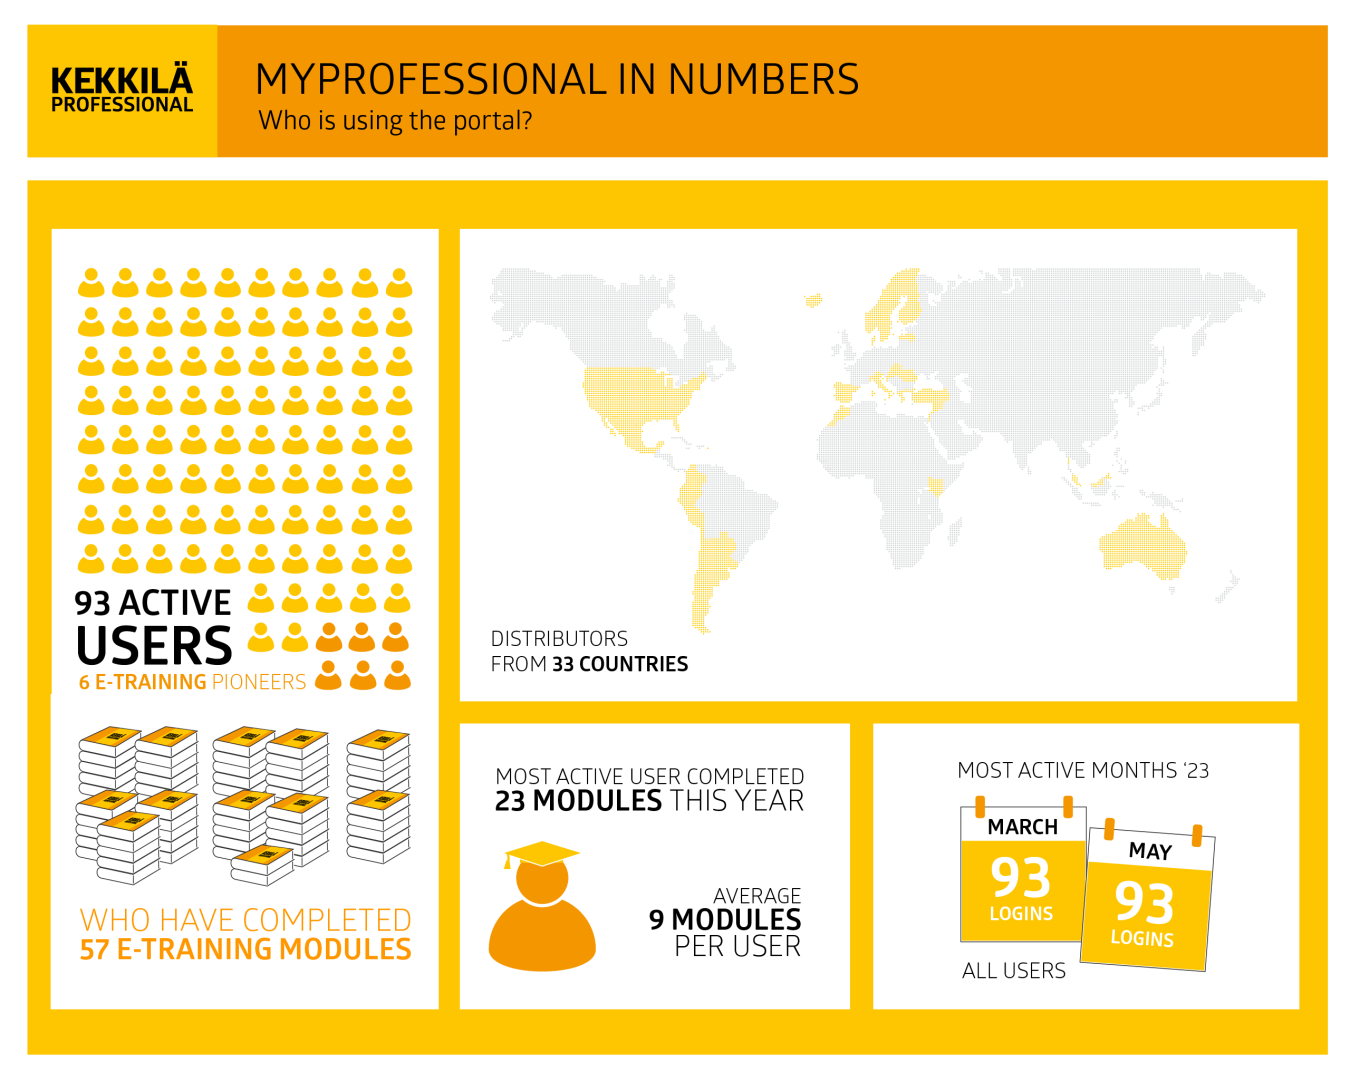 Infographic about the use of MyProfessional